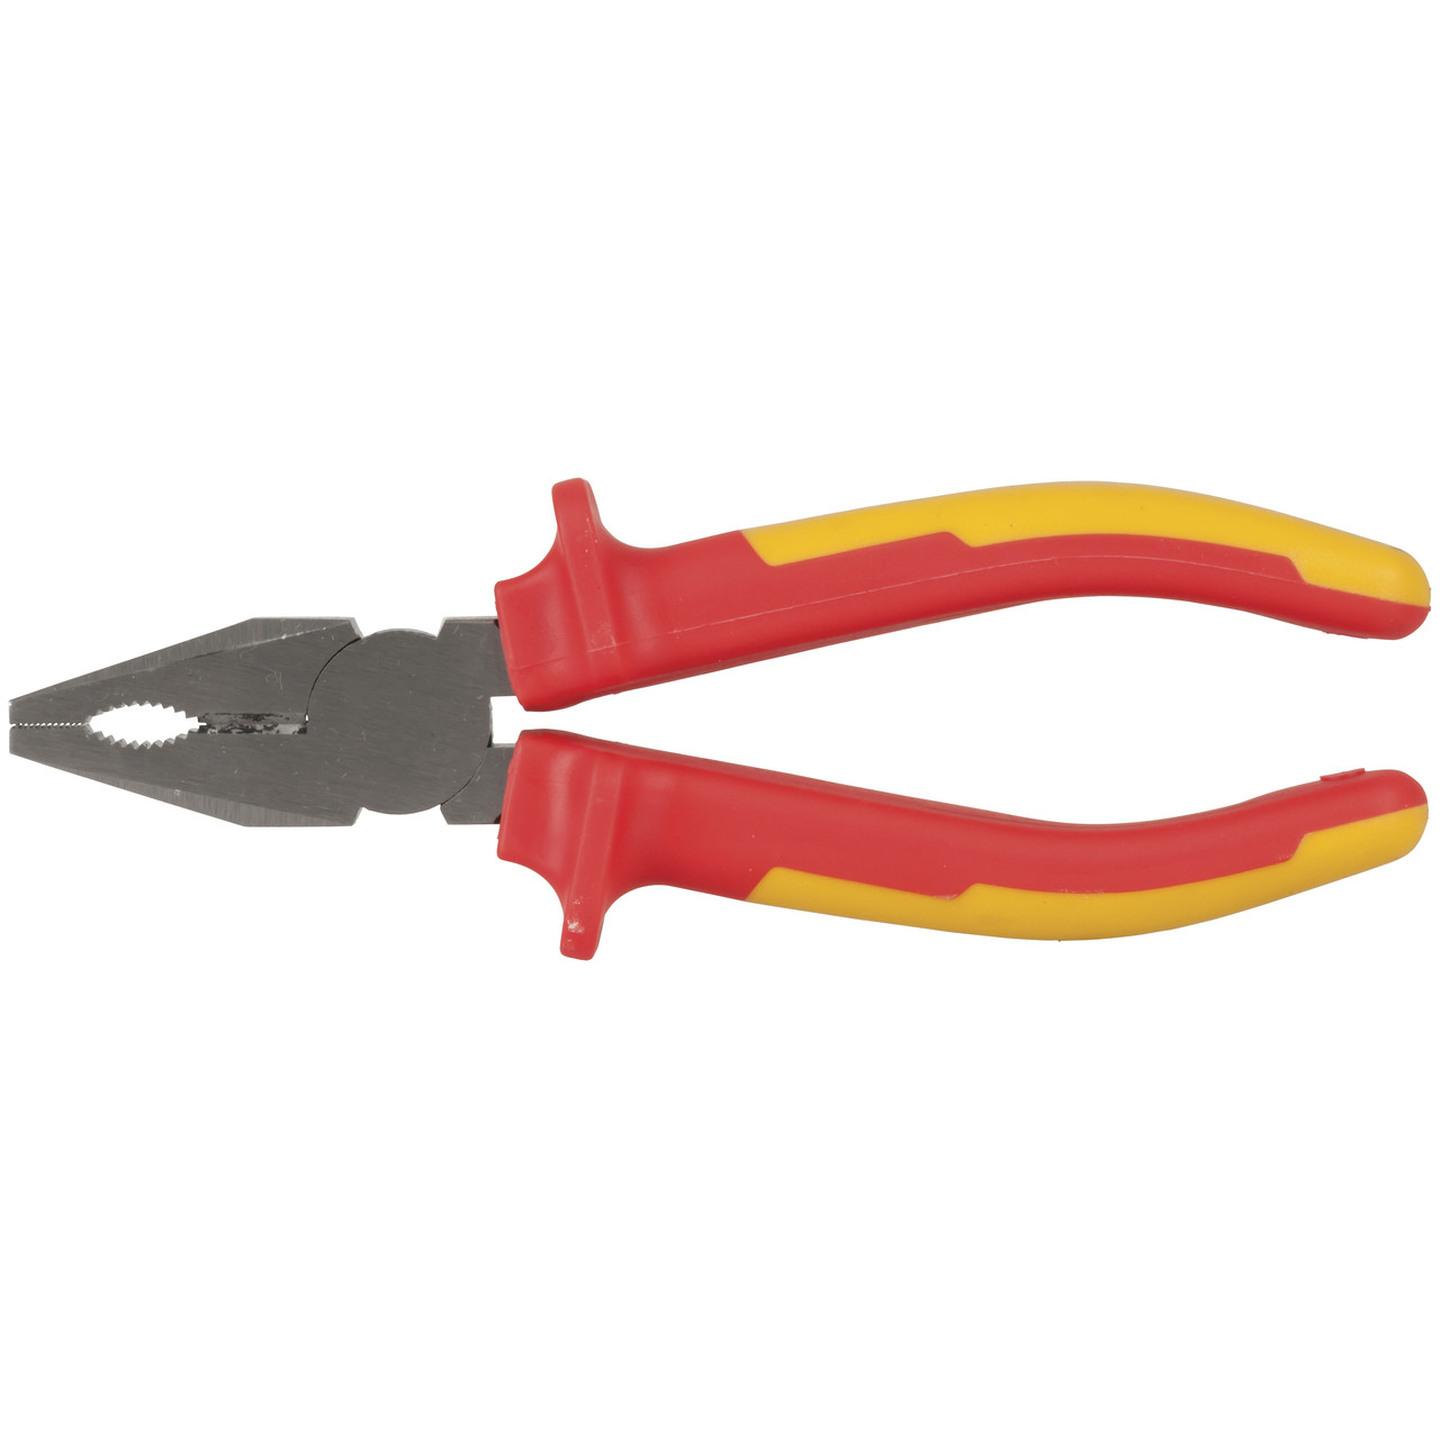 7inch Bull Nose Pliers